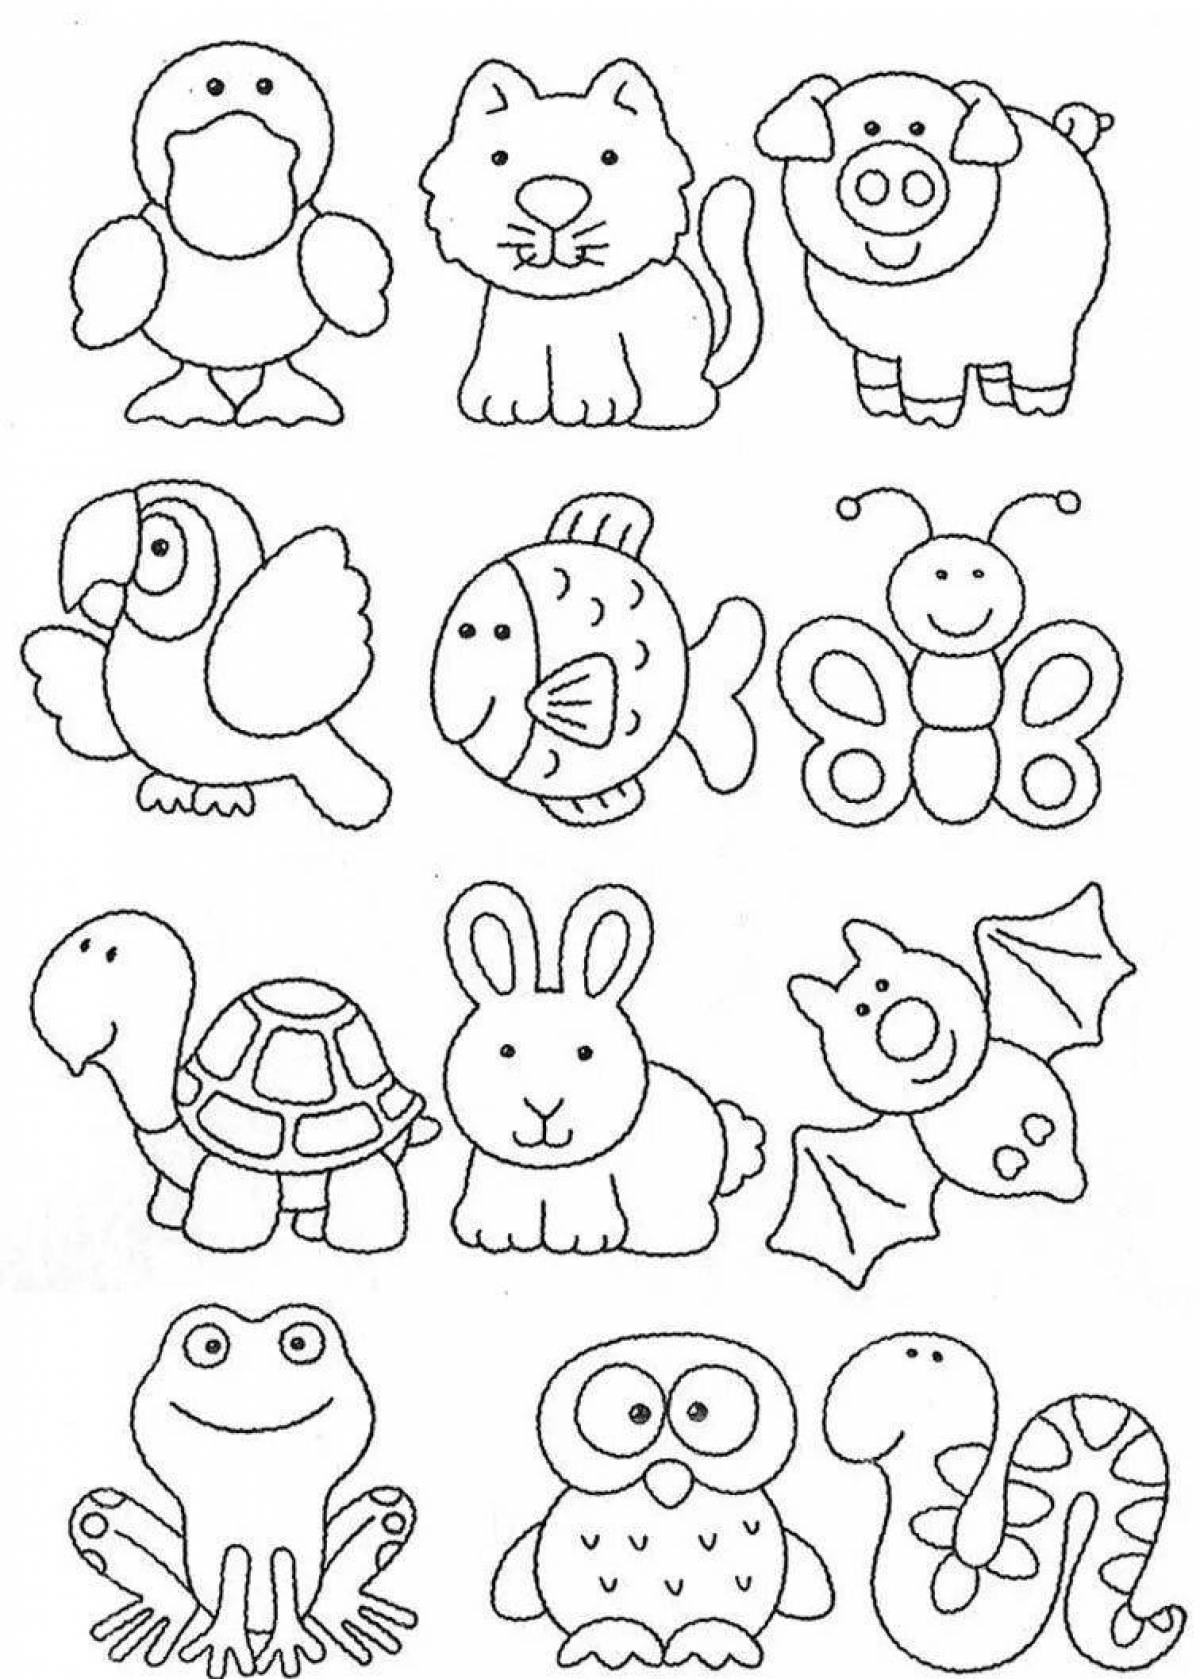 Waggish small animals coloring page